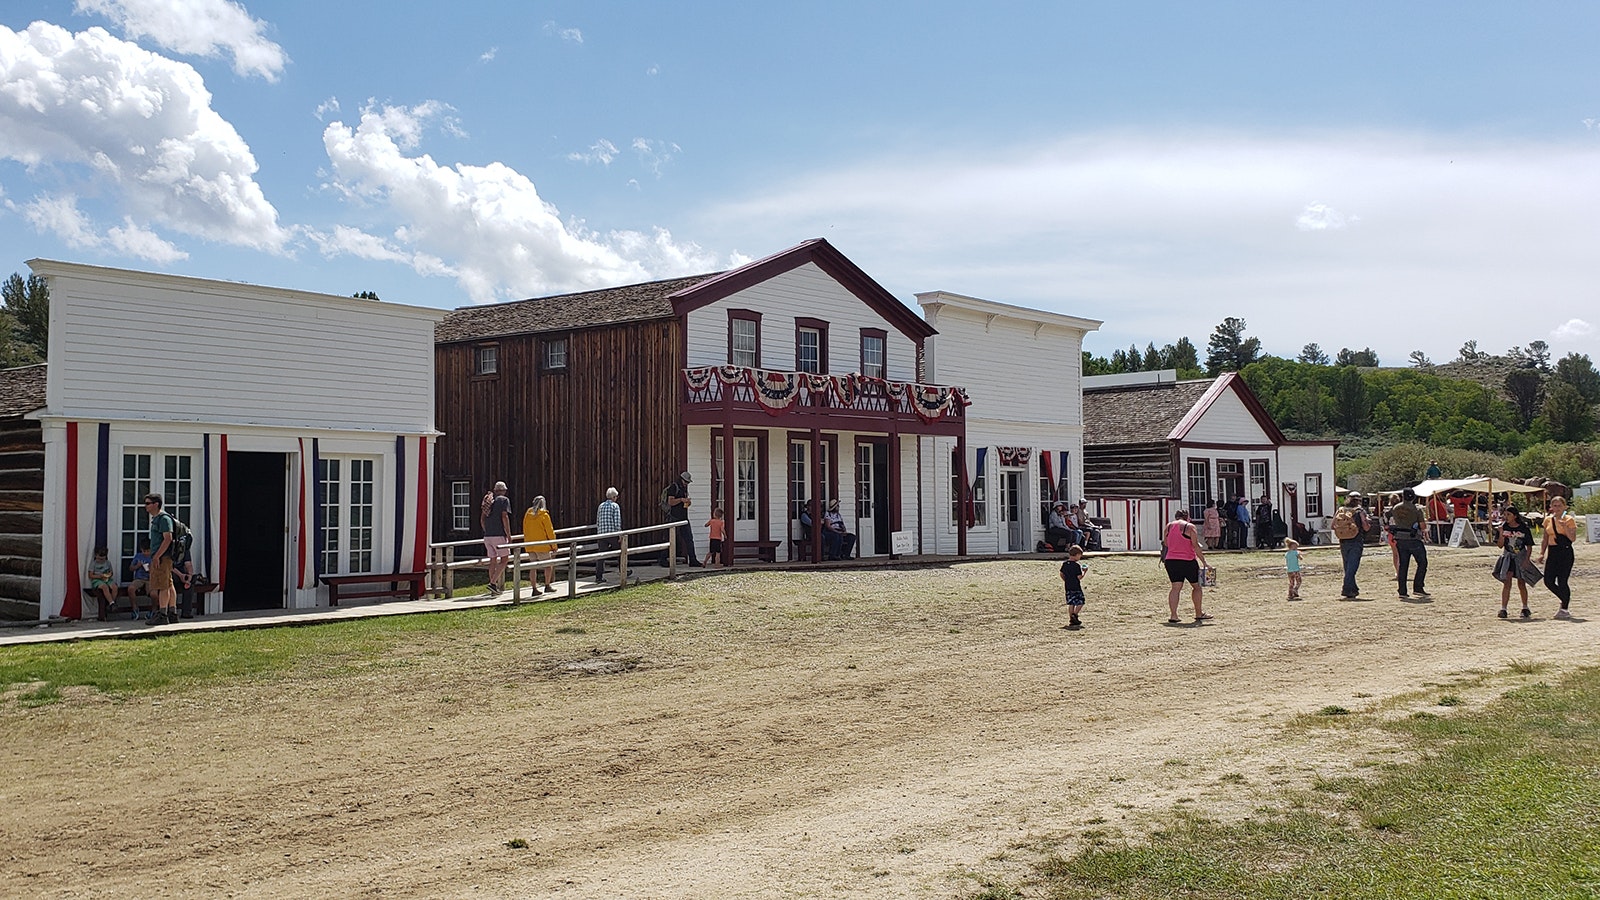 South Pass City's Main Street. The buildings that remain have been restored as accurately as possible Inside each are life size dioramas with period items showing life in a gold rush town.